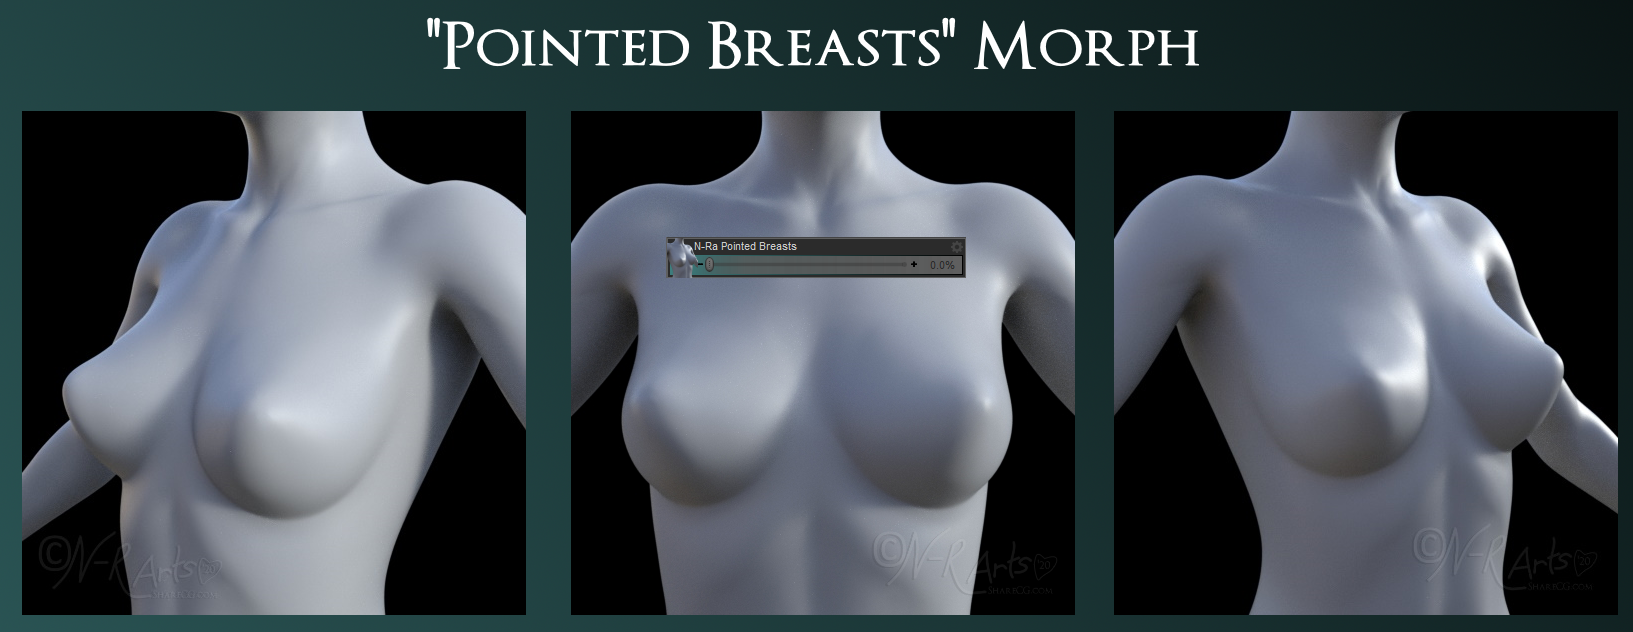 Pointed Breast Pics